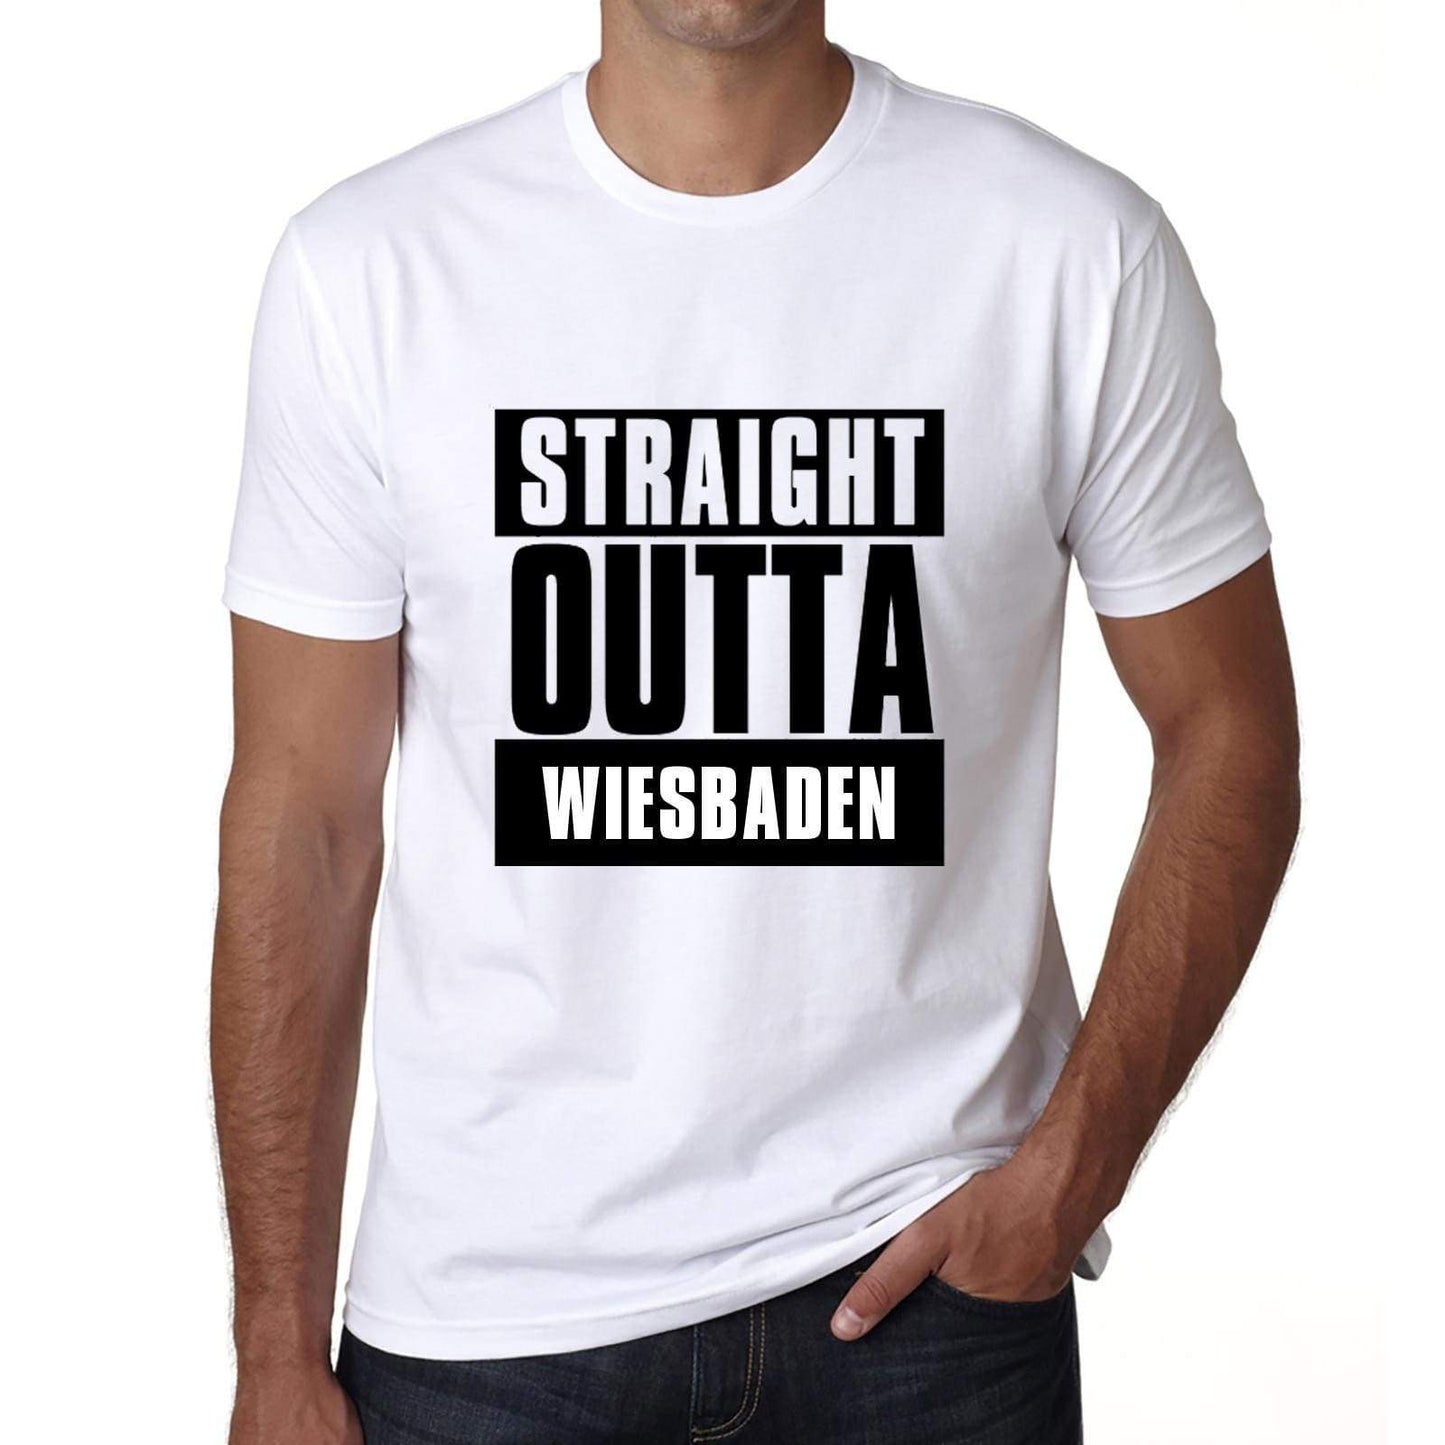 Straight Outta Wiesbaden Mens Short Sleeve Round Neck T-Shirt 00027 - White / S - Casual